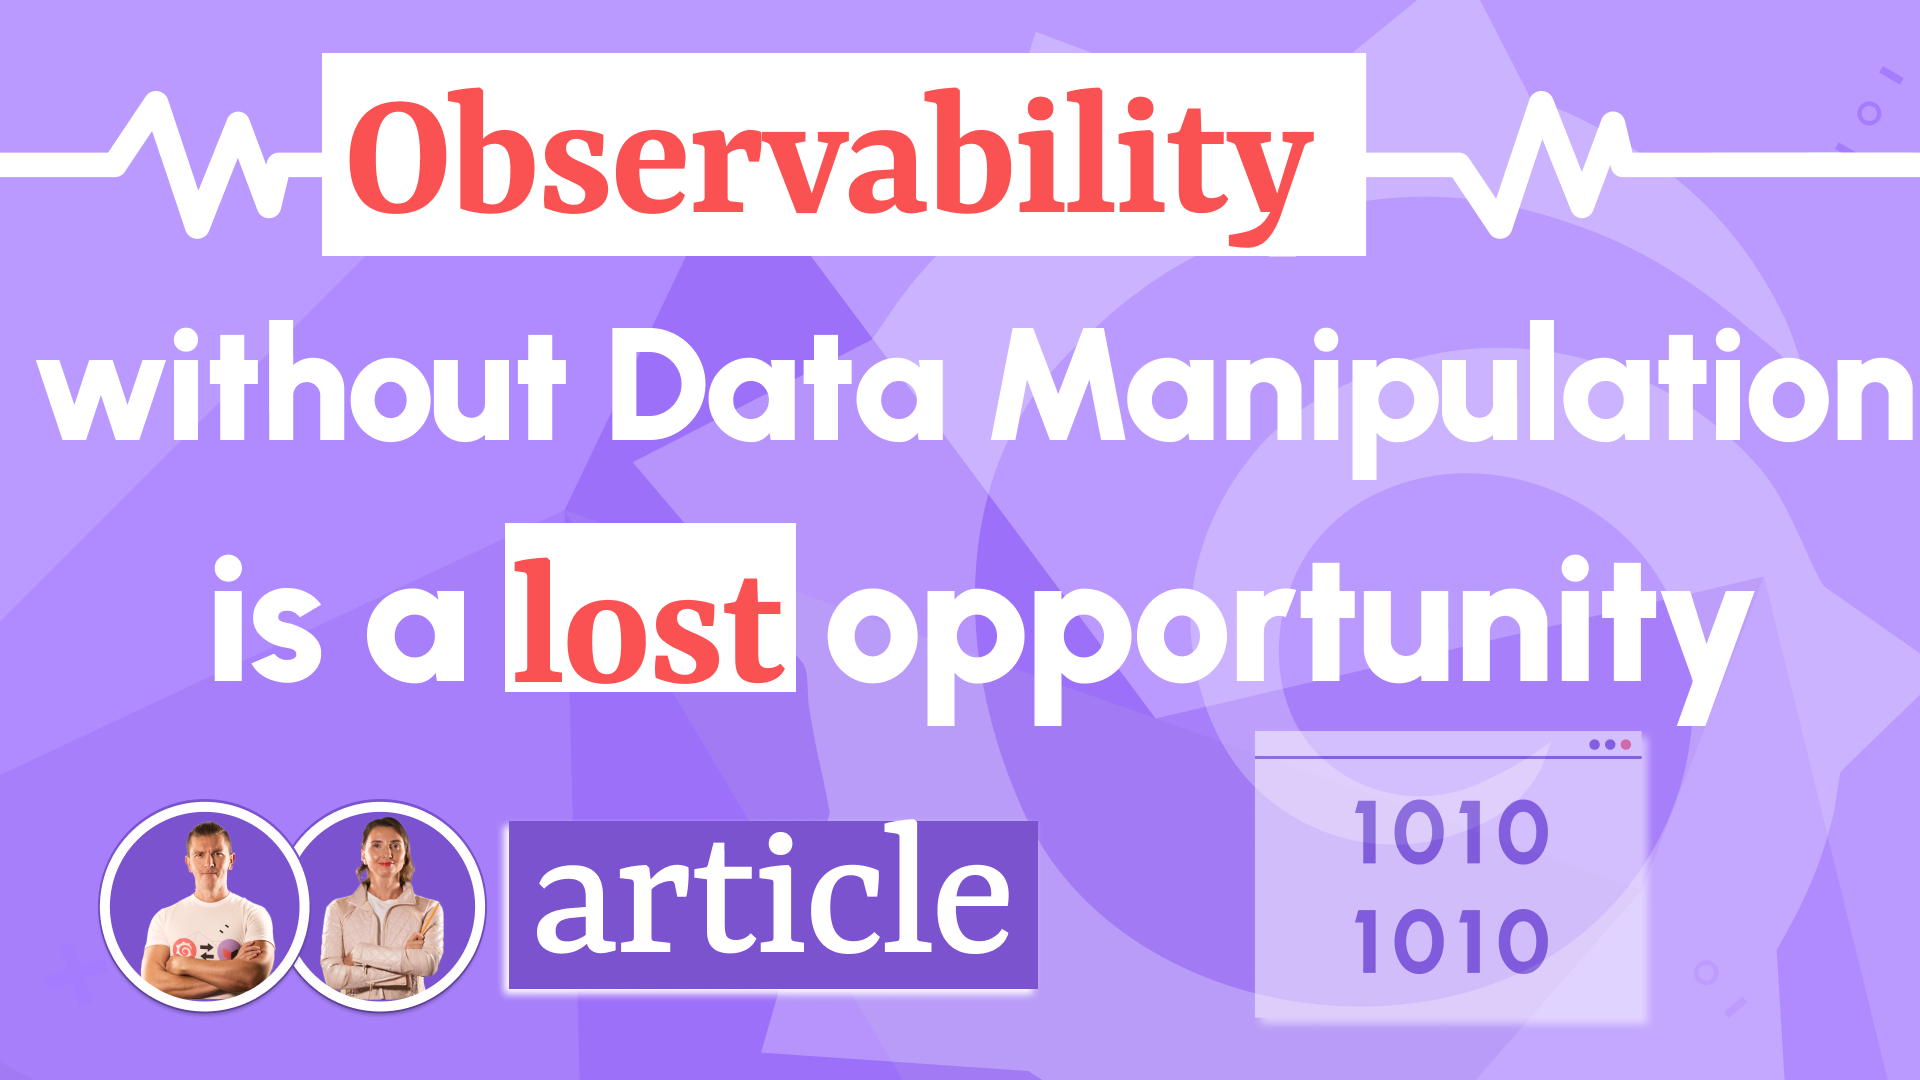 Observability without Data Manipulation is a lost opportunity